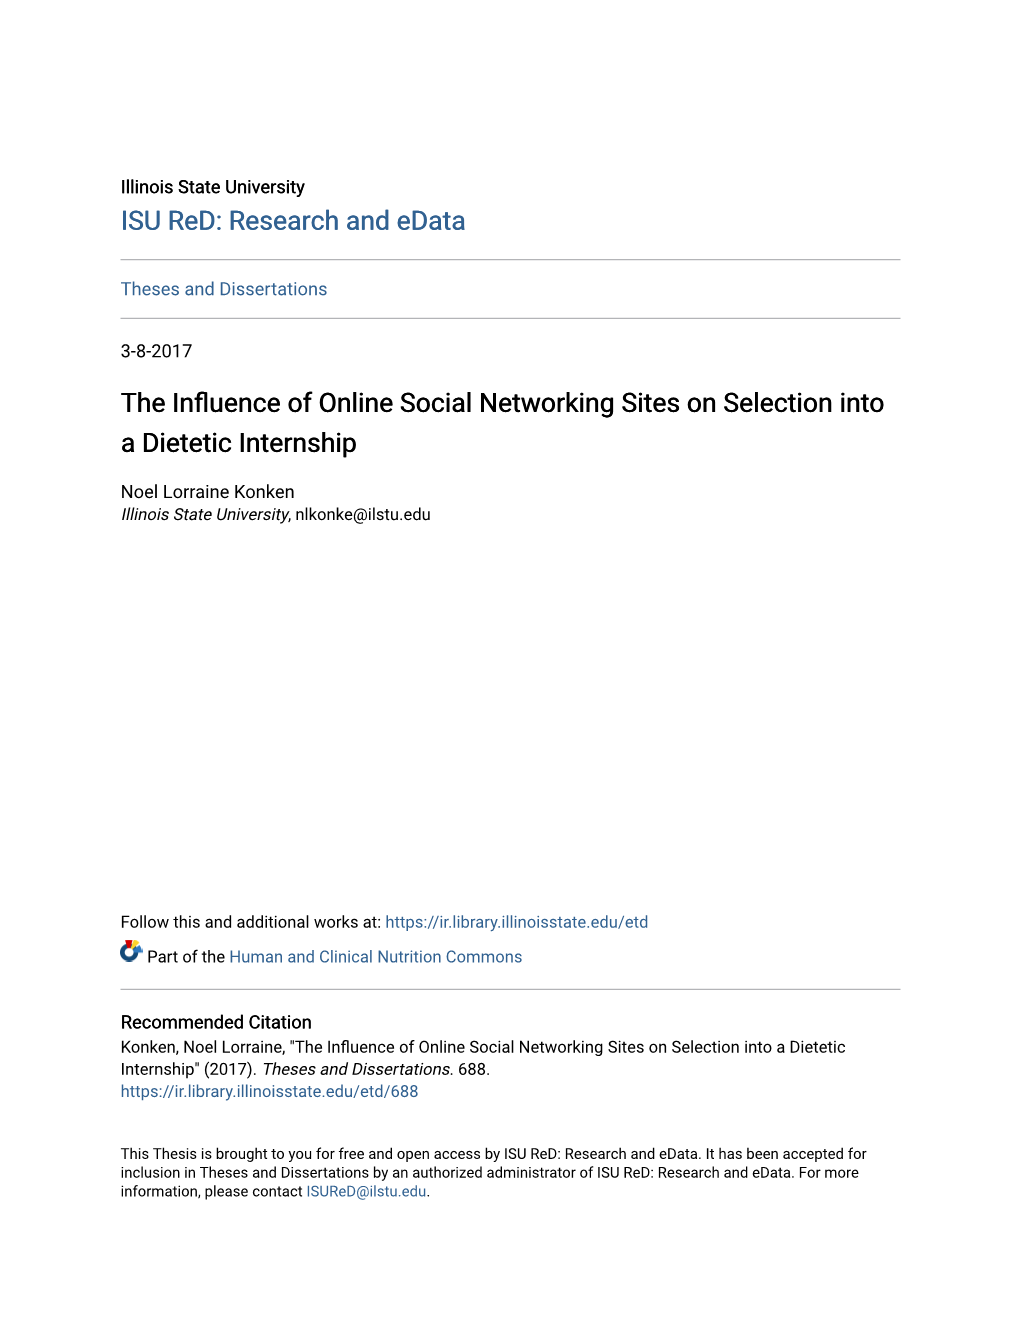 The Influence of Online Social Networking Sites on Selection Into a Dietetic Internship